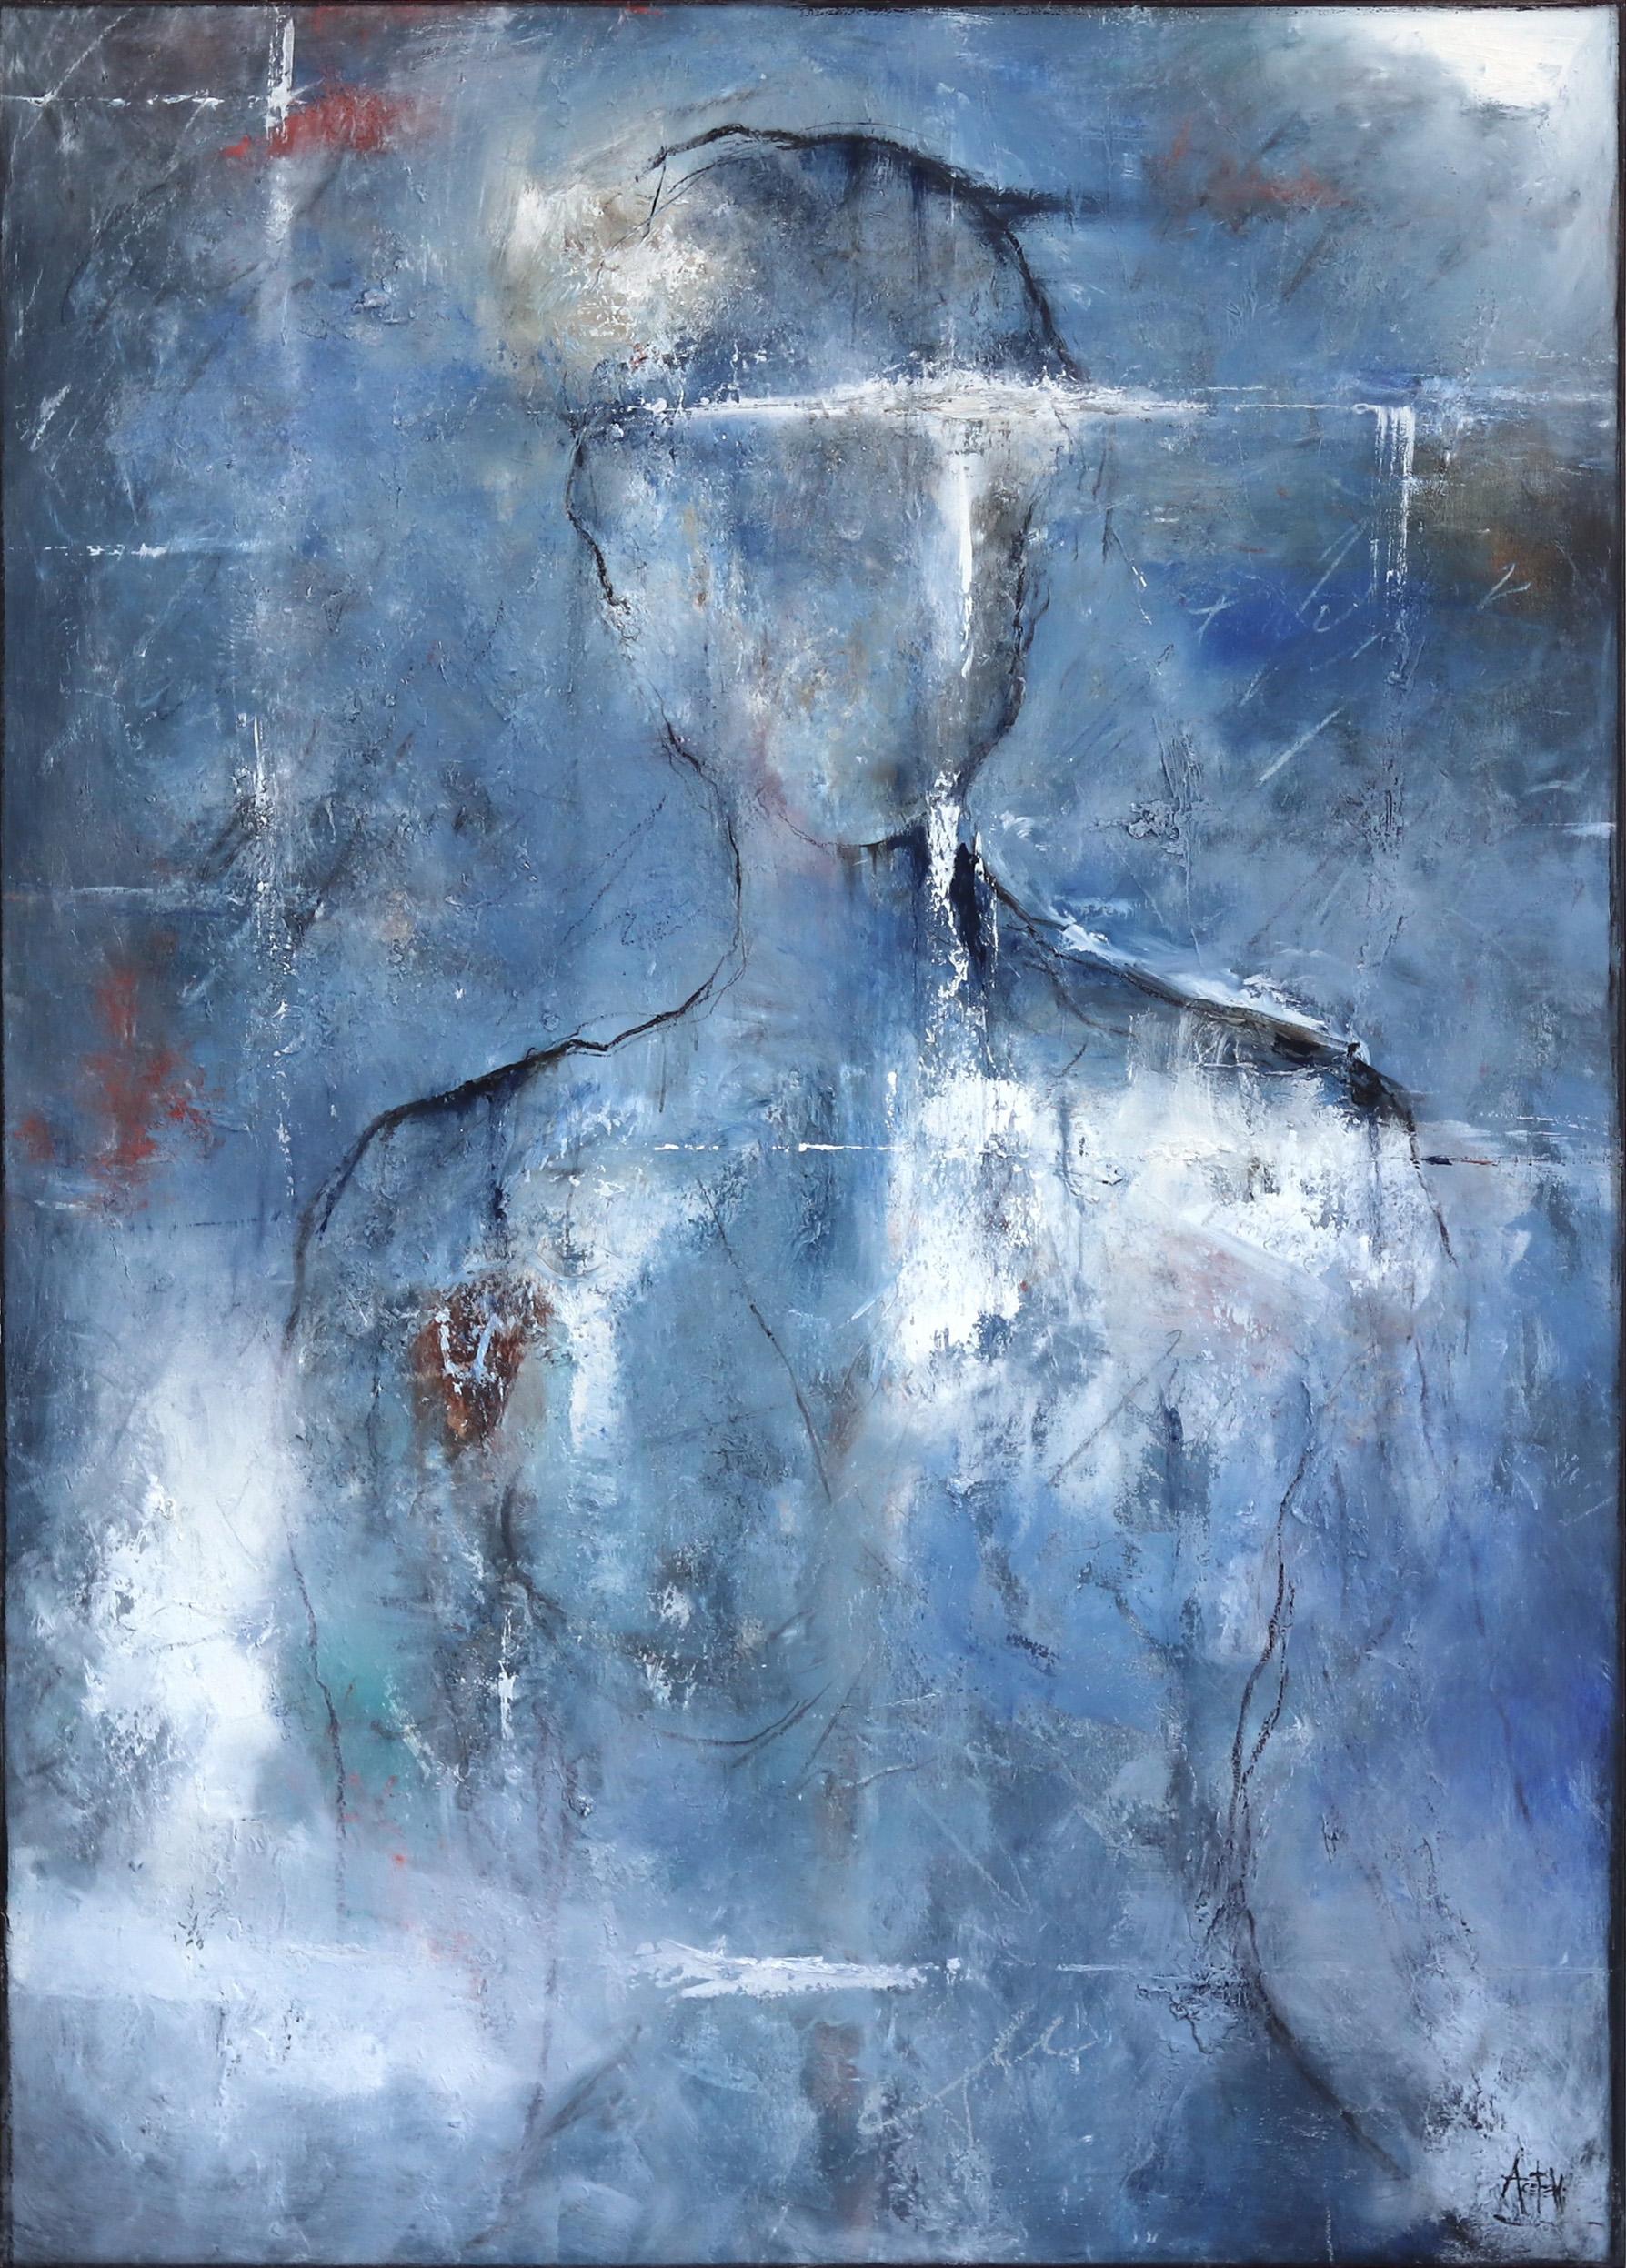 Meritage- Original Oil on Canvas Abstract Figurative Painting